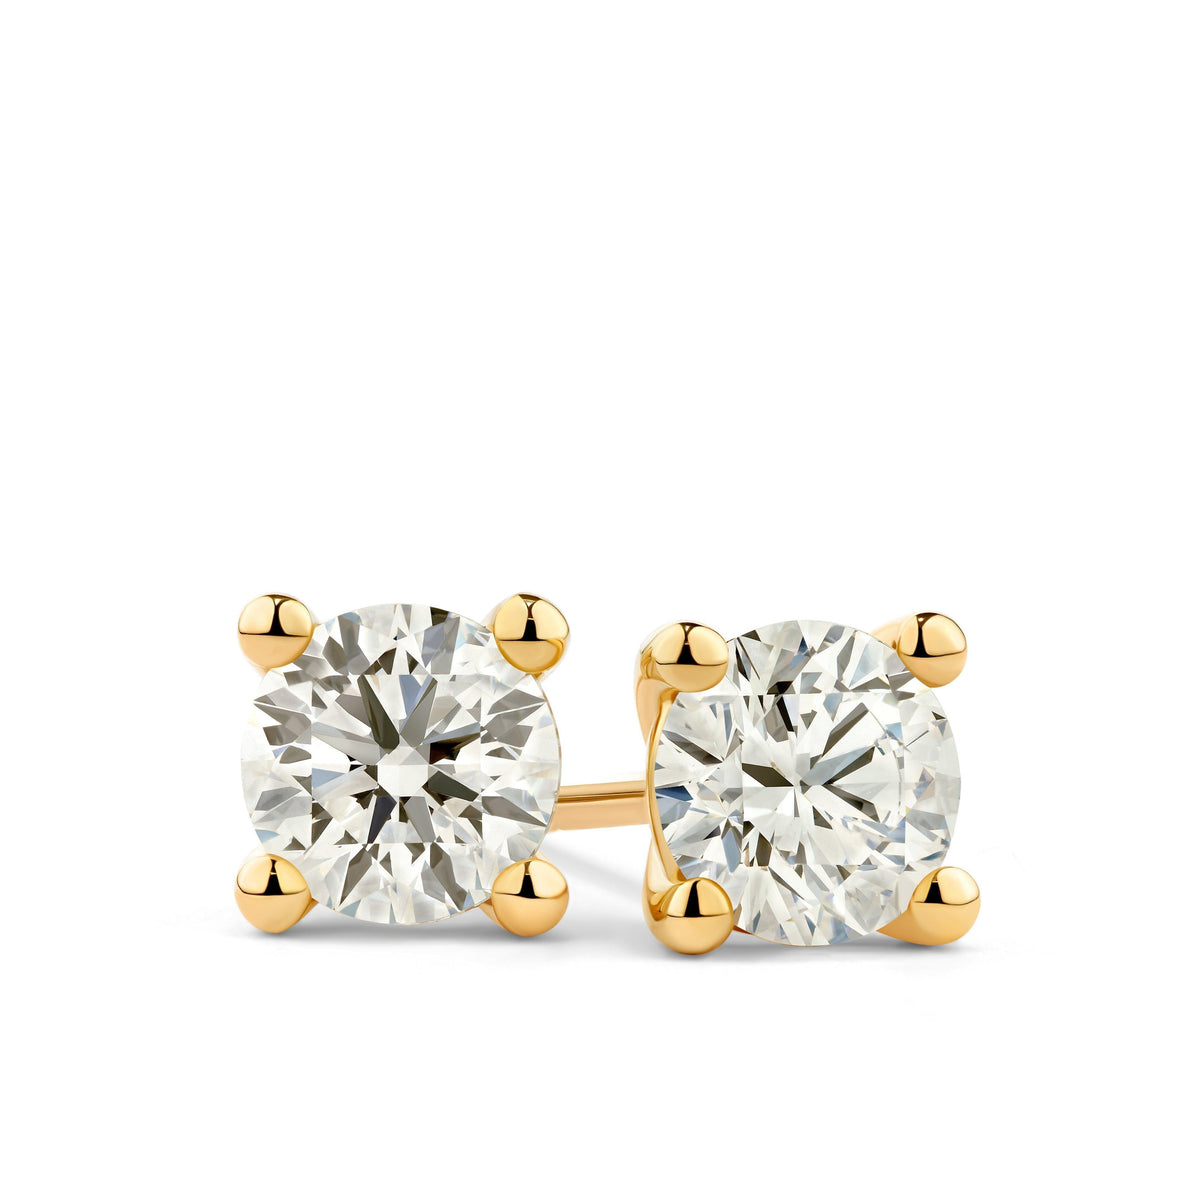 Rendition Solitaire Earrings in 9ct Yellow Gold - Wallace Bishop